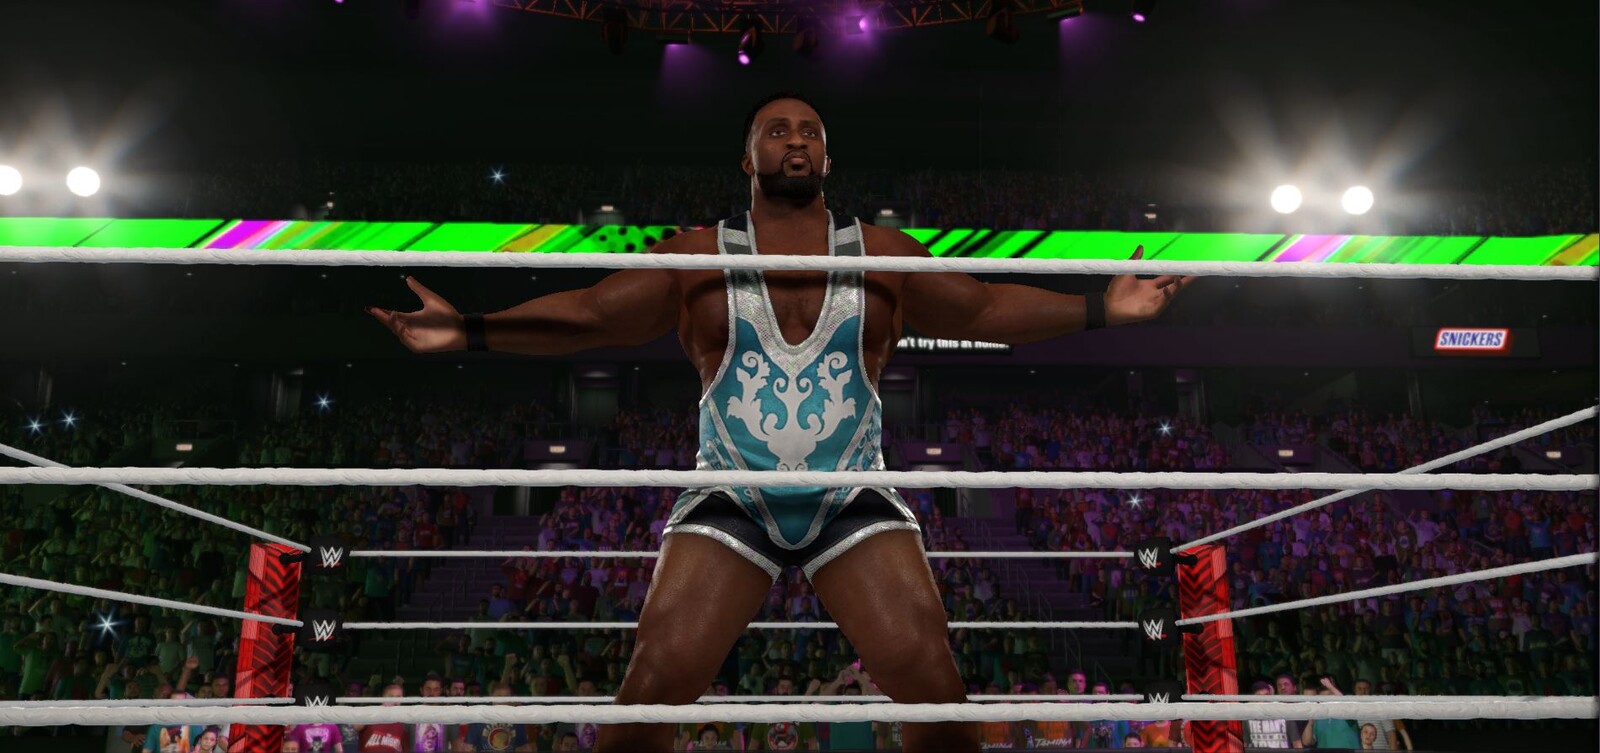 Big E
based on their attire when they cashed in their Money in the Bank contract on Sept. 13, 2021